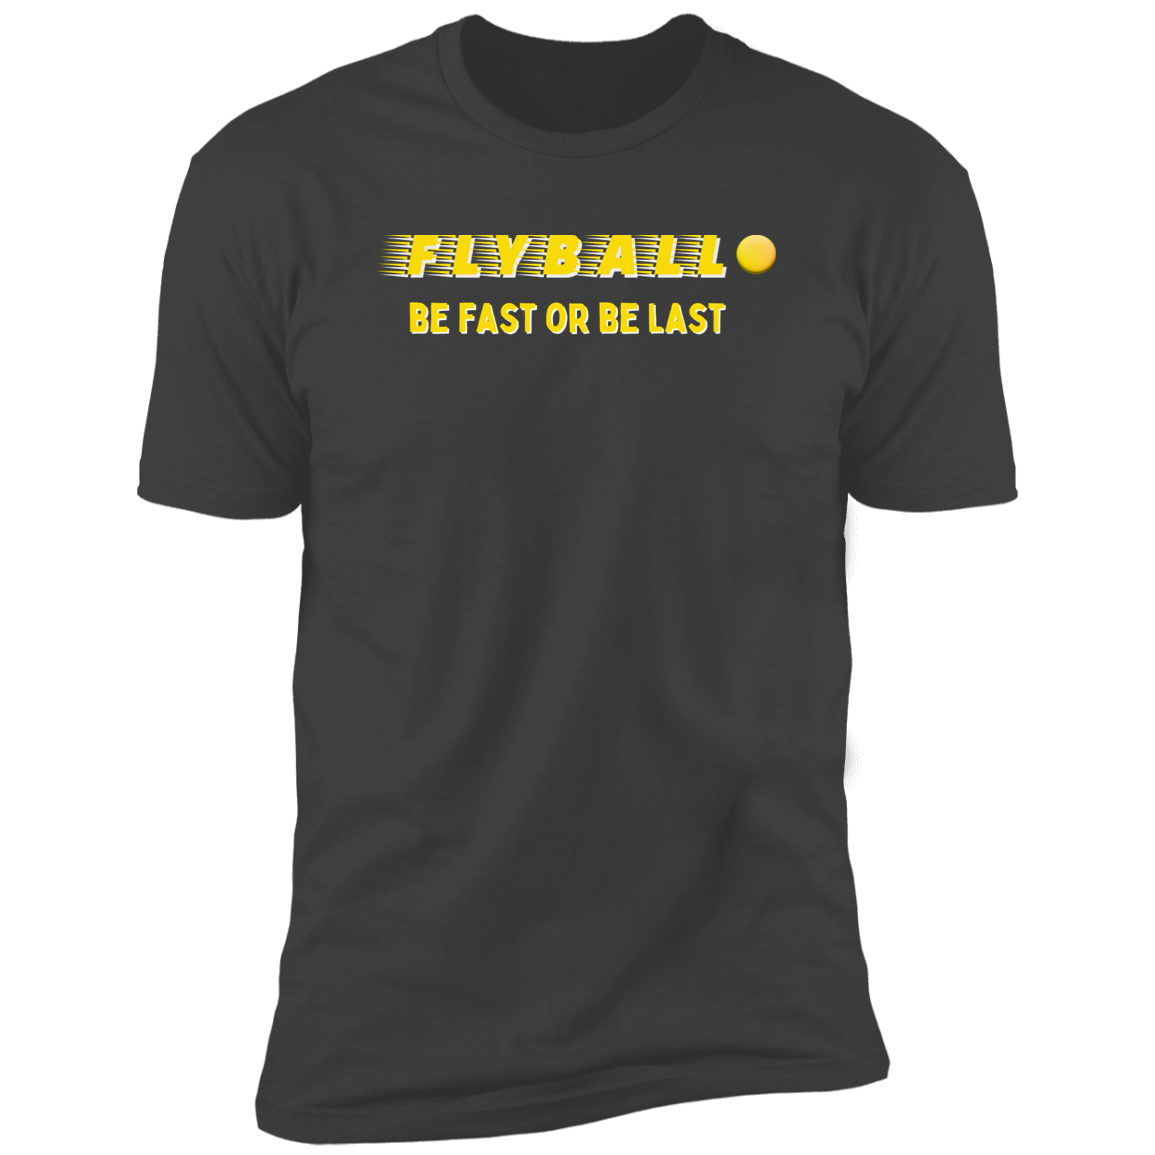 Flyball Be Fast or Be Last Dog Sport T-shirt, Flyball Shirt for humans, in heavy metal gray